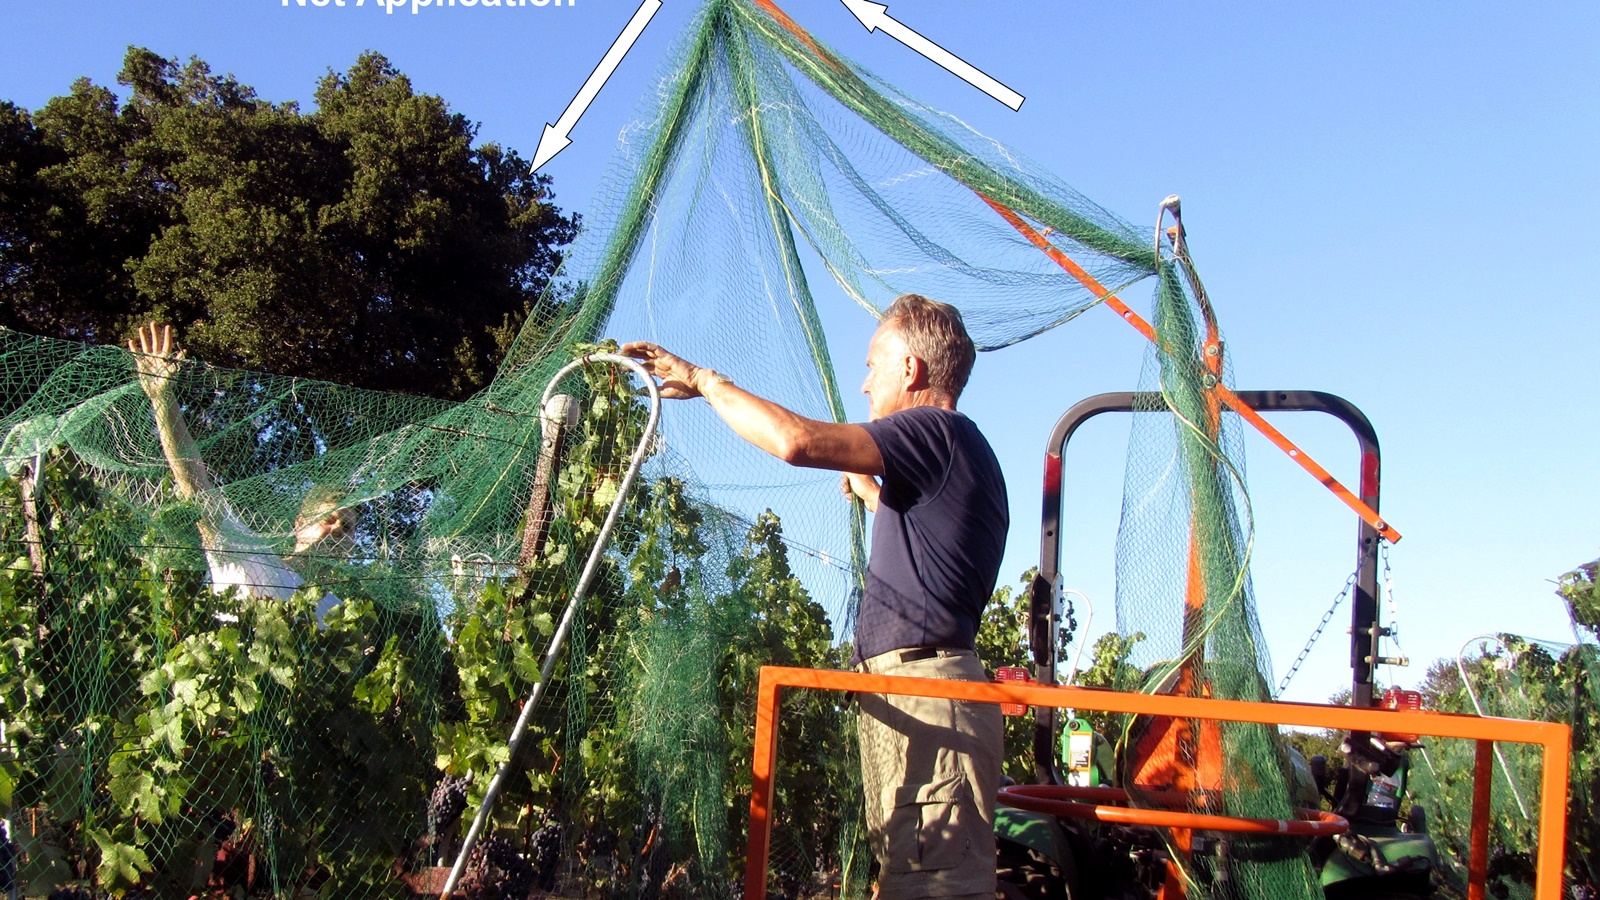 5 Netting: protect from birds